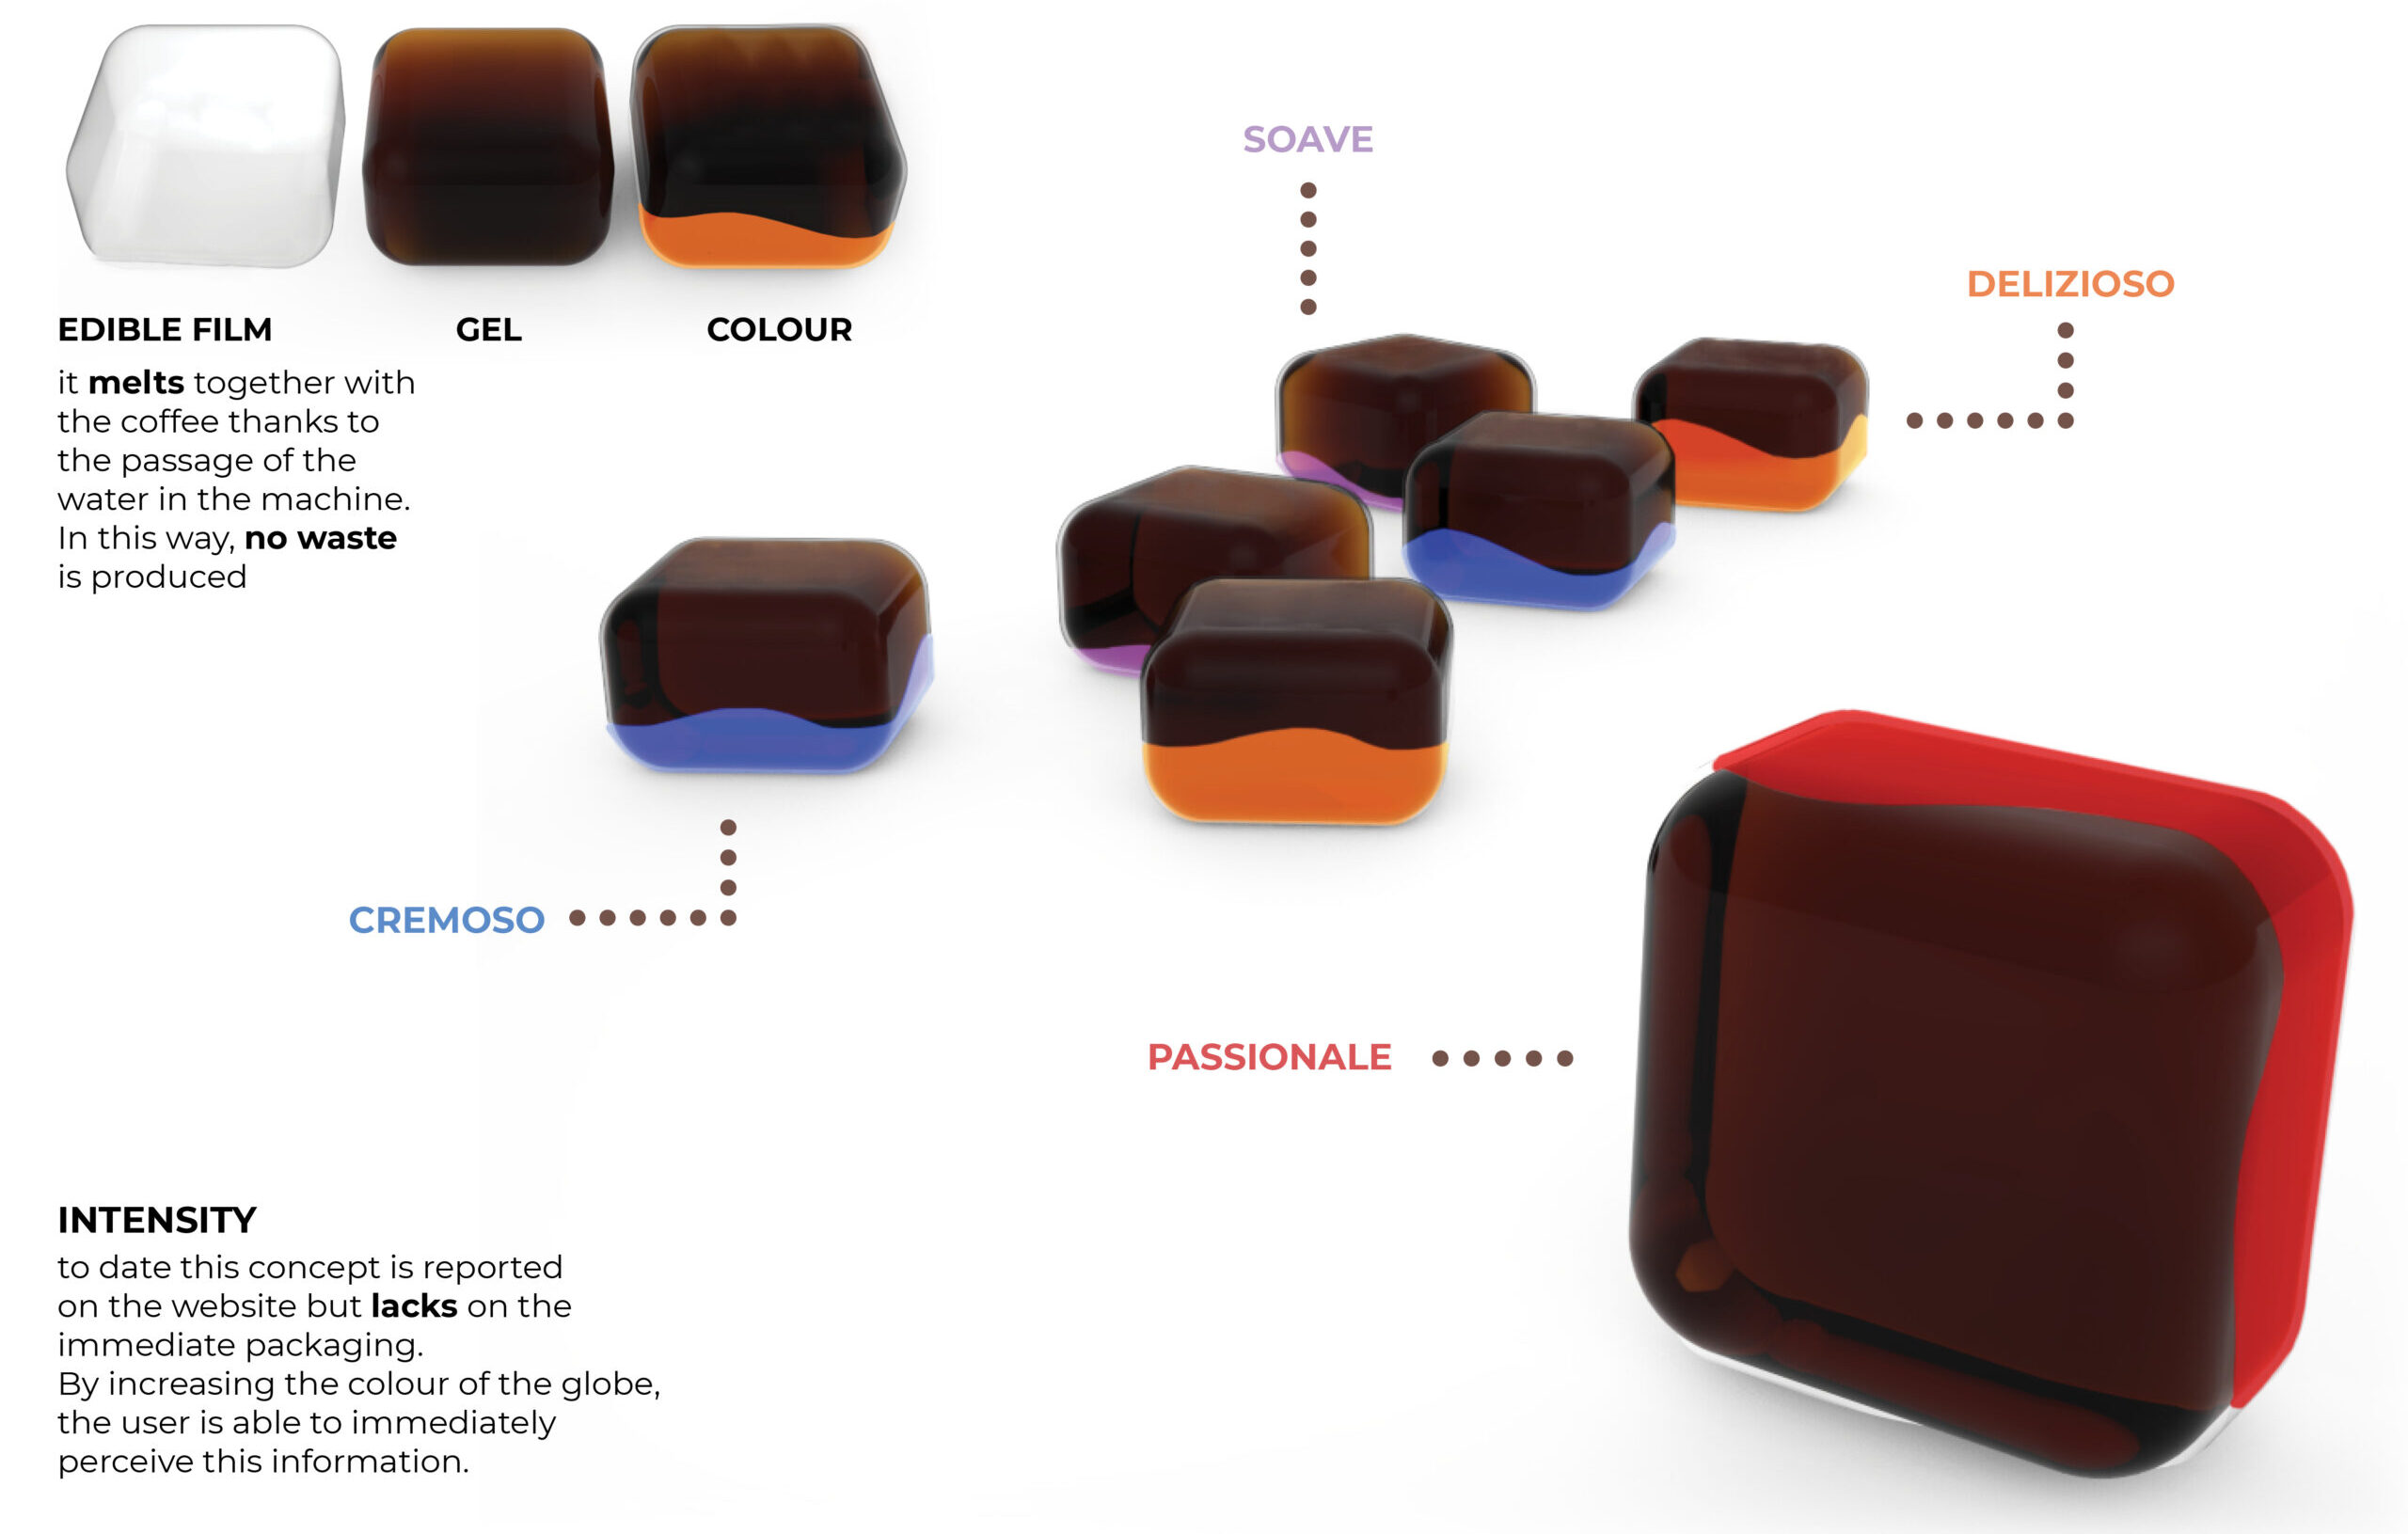 Description of the innovative coffee capsules with edible film